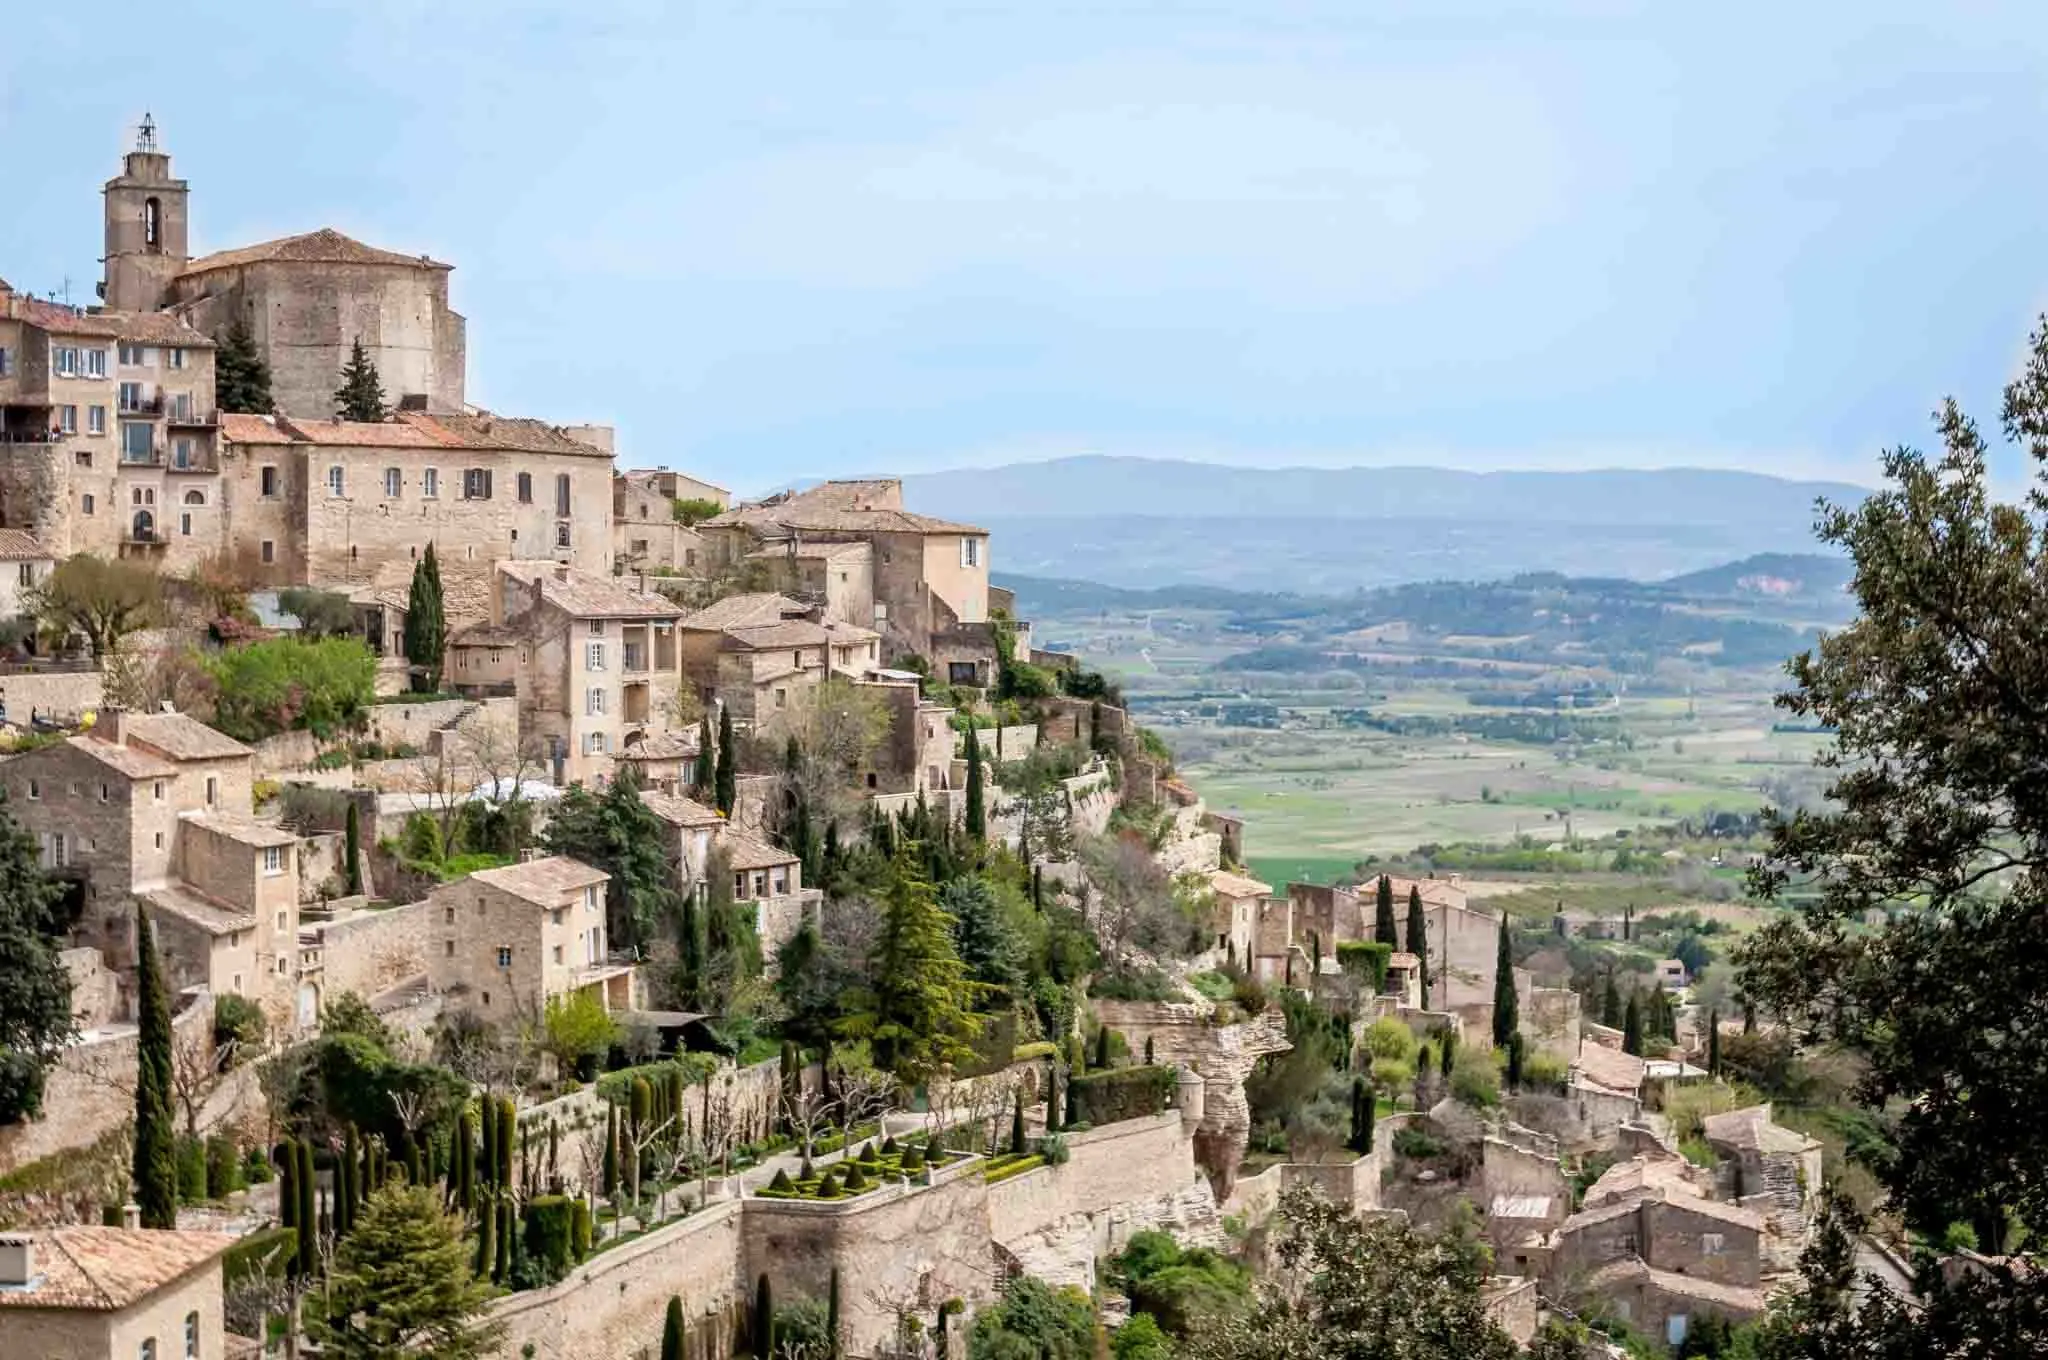 Stone buildings on a mountainside descending to a valley in Gordes